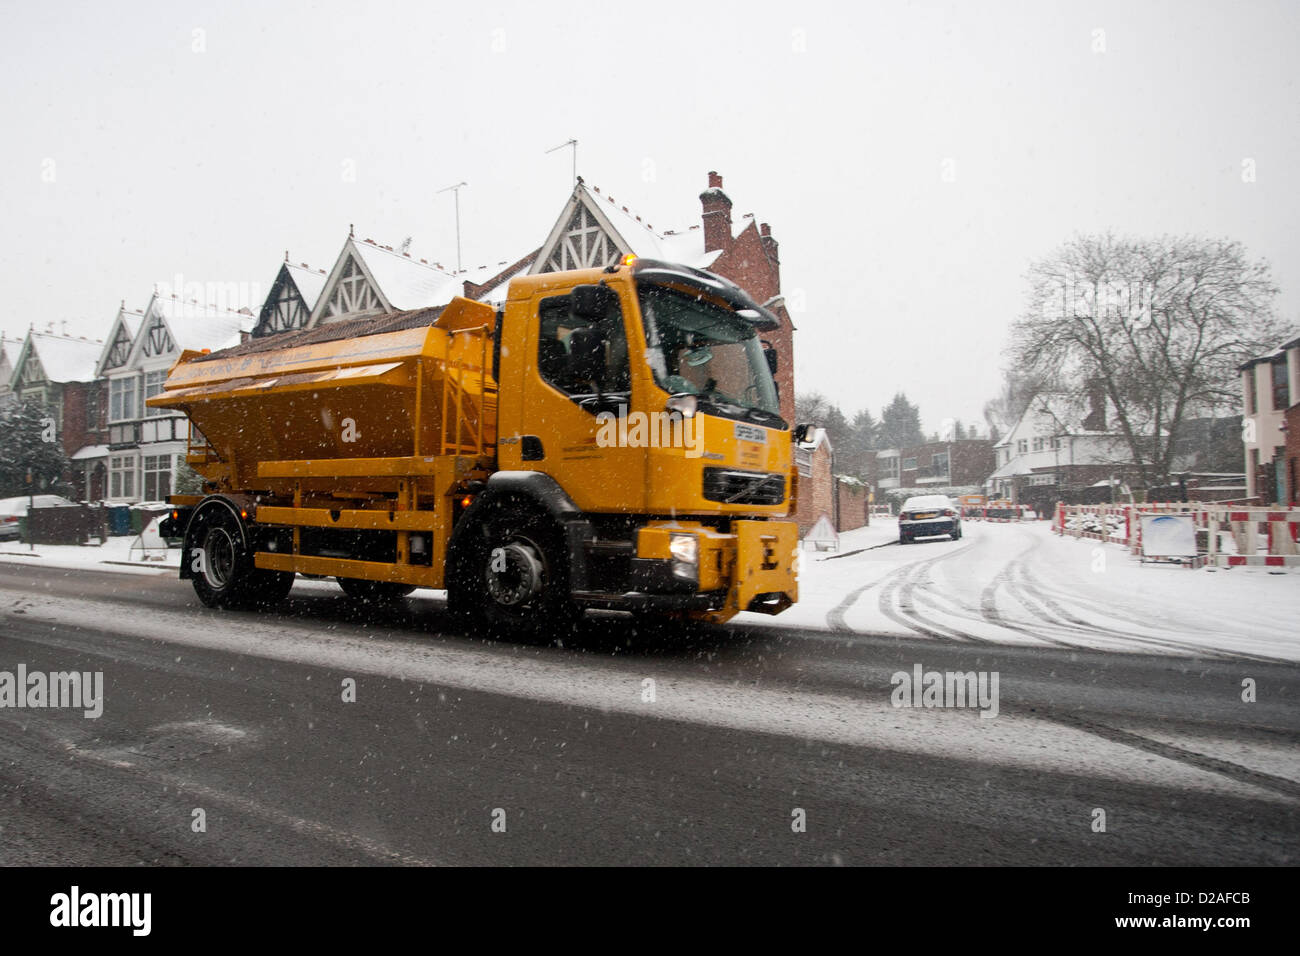 Harrow, London UK. 18th January 2013. (Pictured) A gritter truck on a icy road in London. Snow in Harrow and across the uk today Credit:  Peter Barbe / Alamy Live News Stock Photo